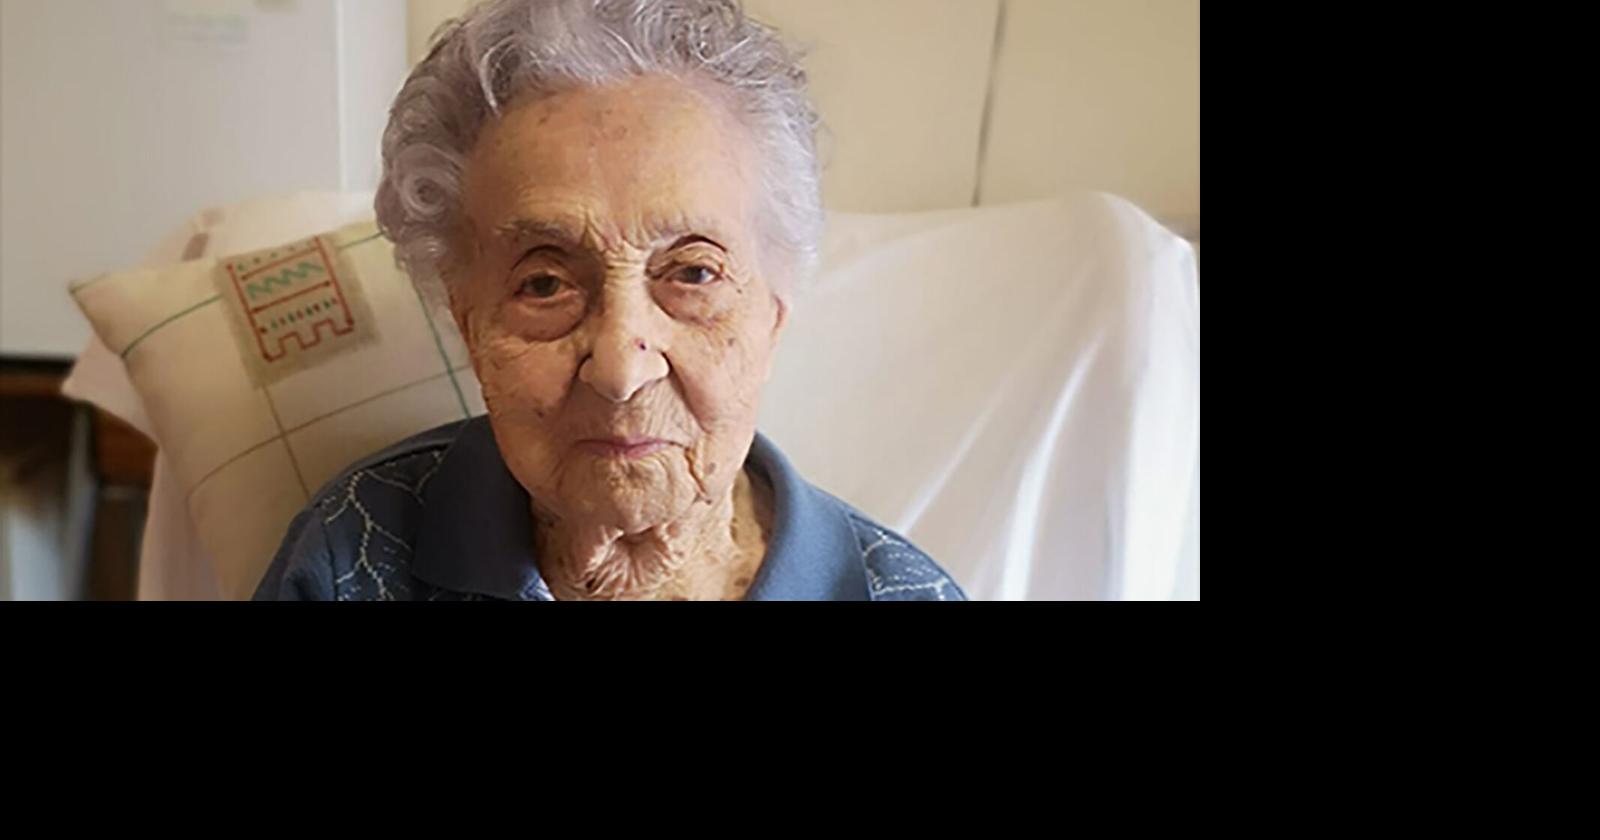 US-born Spanish woman is now the world's oldest person, at age 115